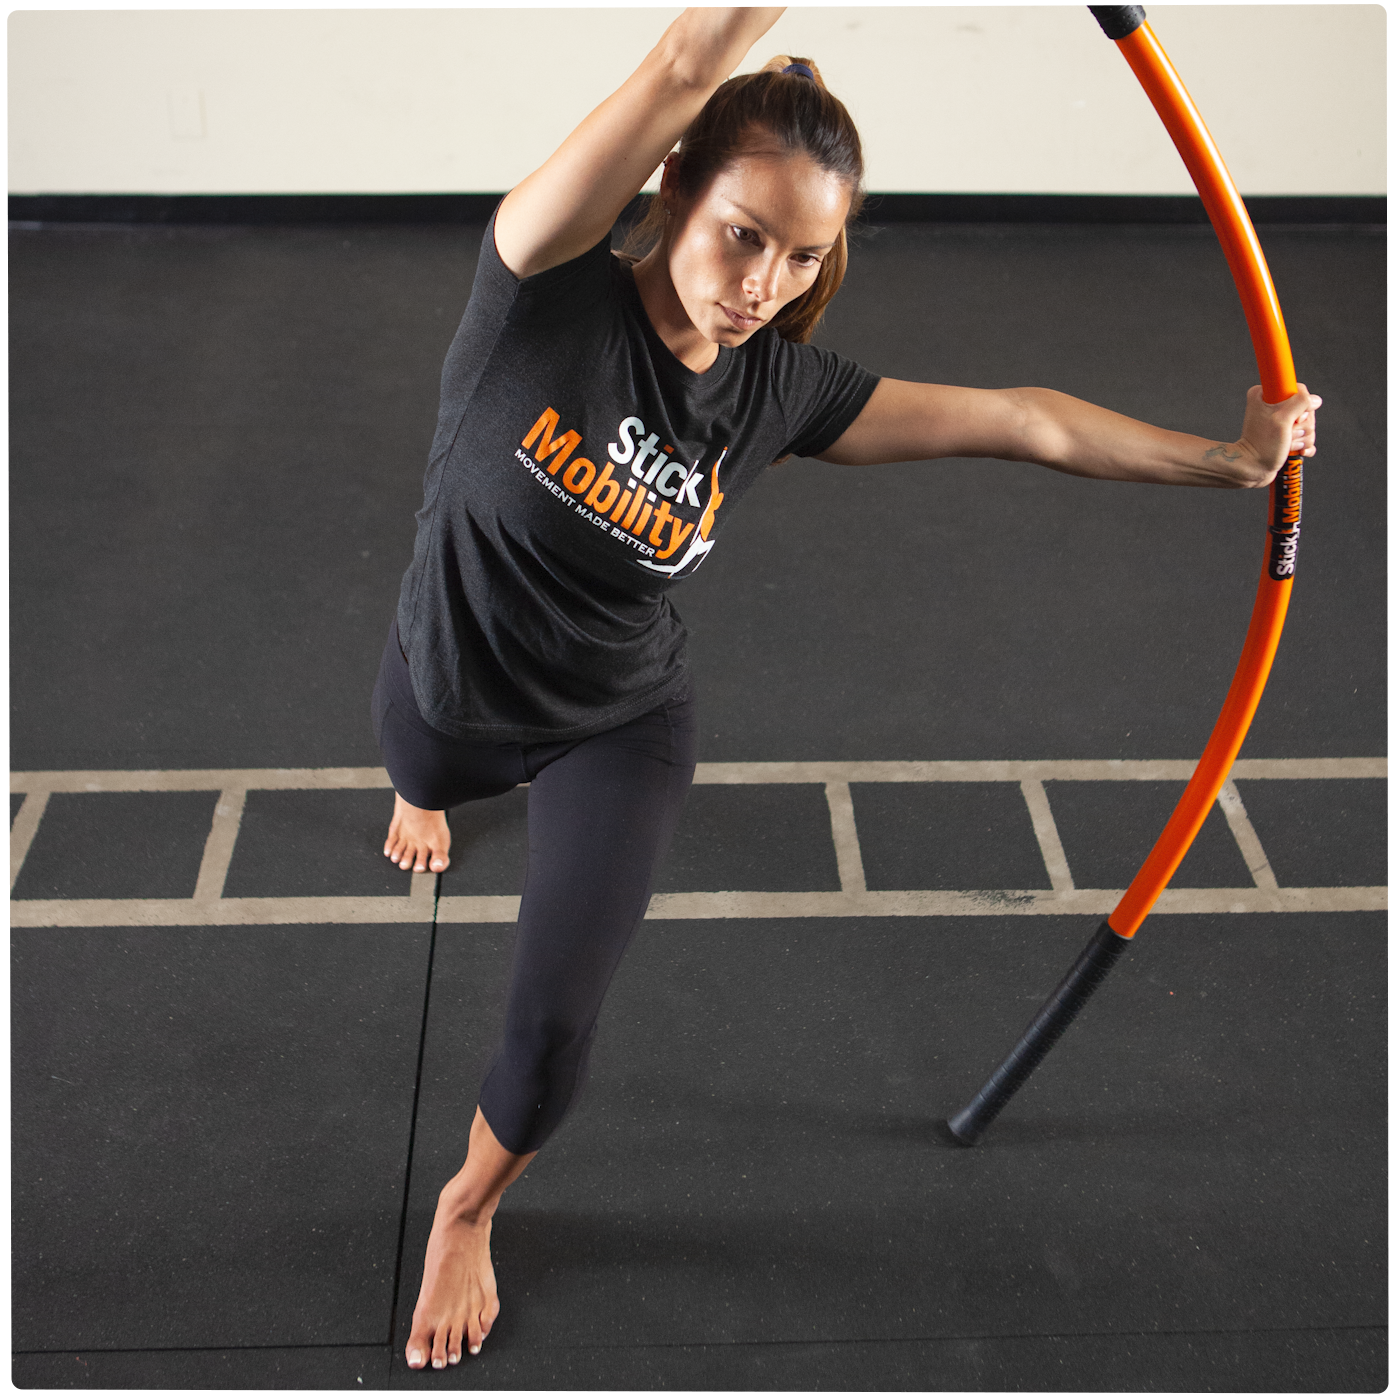 Technogym Mobility Stick: exercise stick for stretching, core & joint  mobility